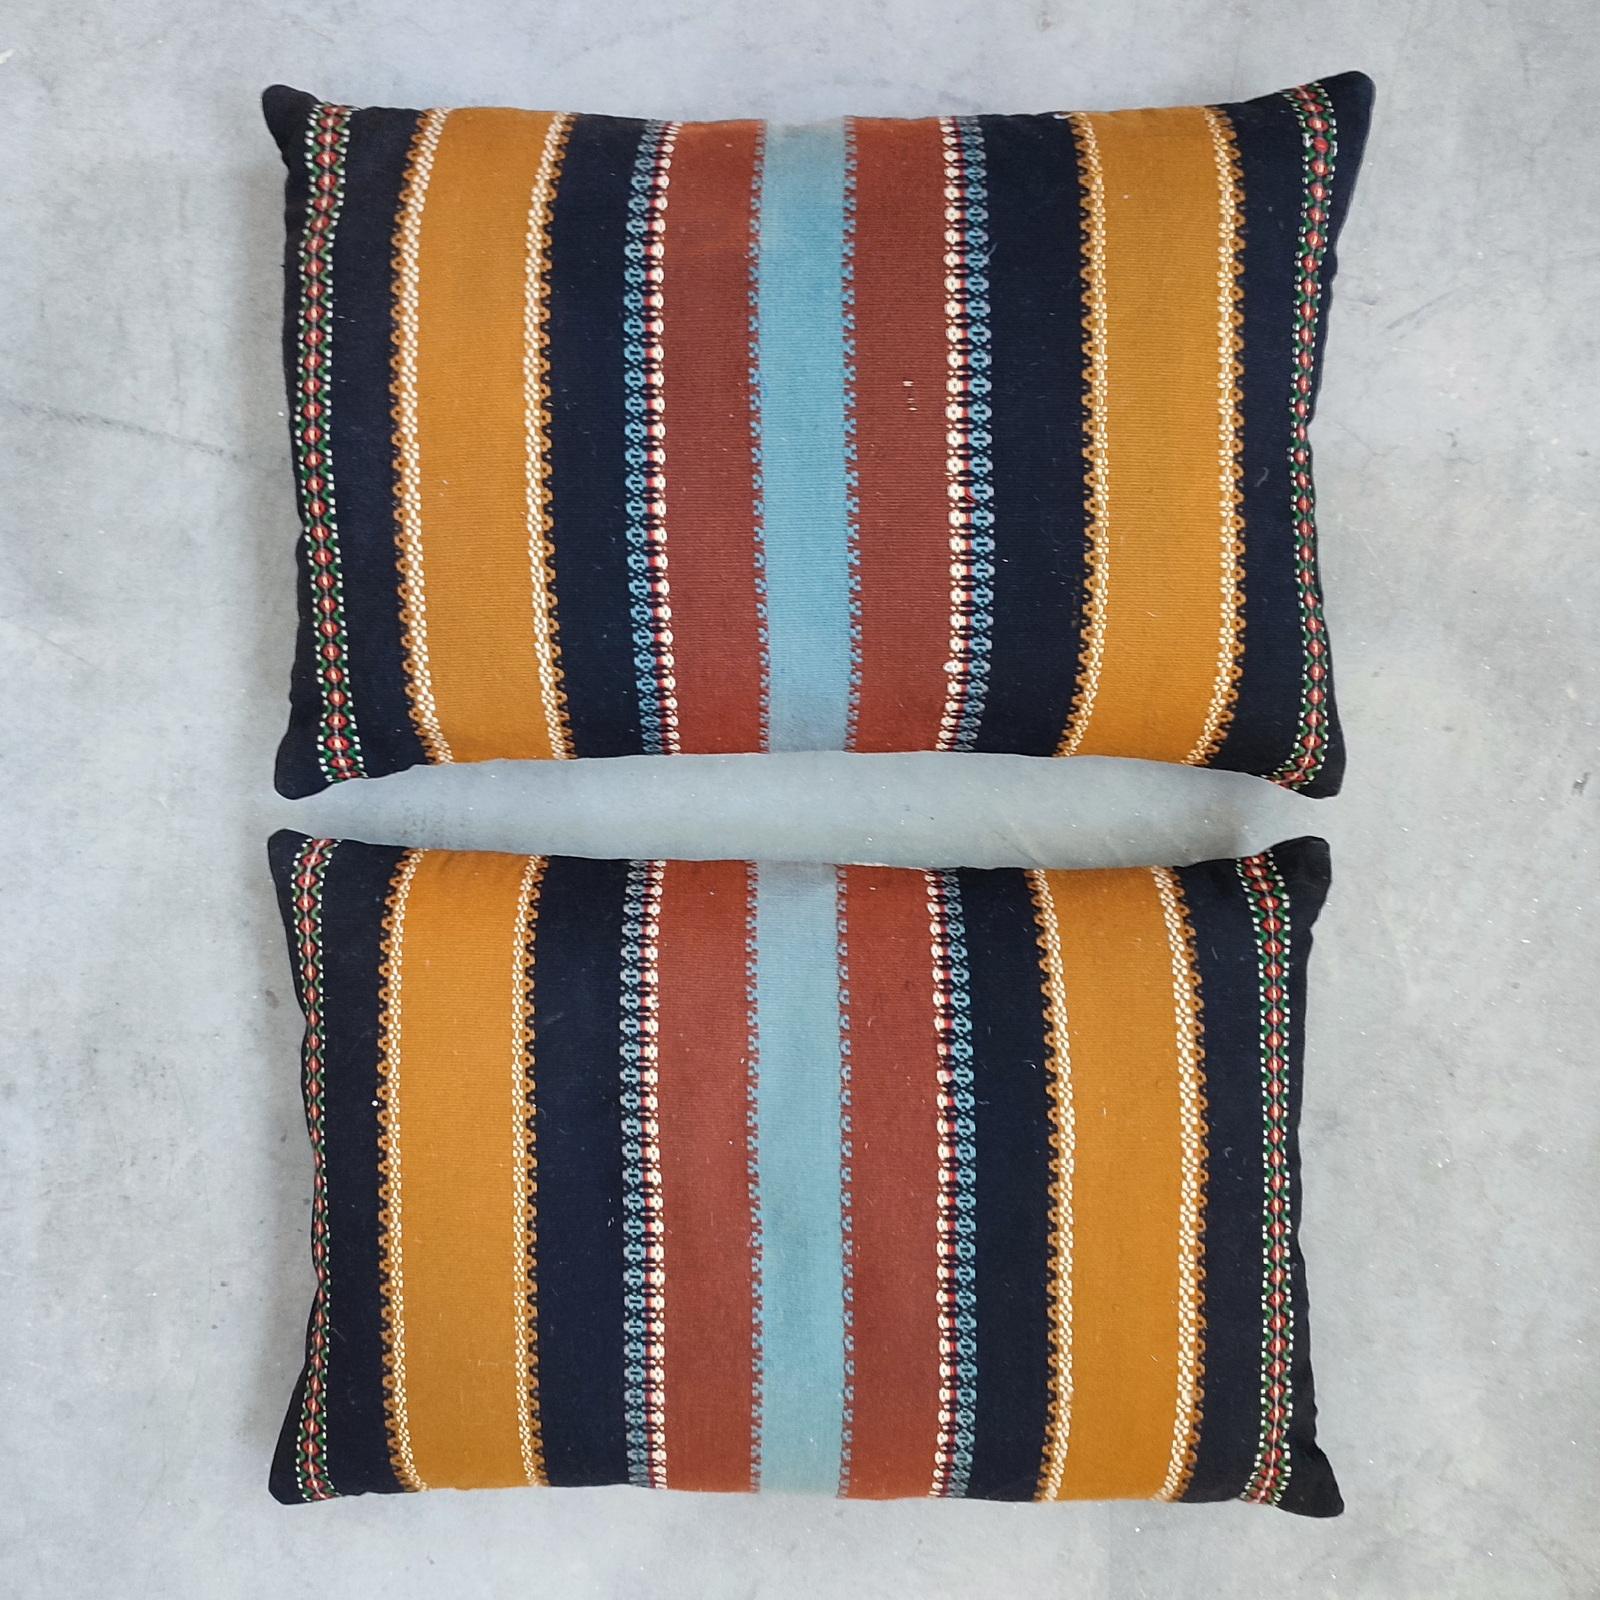 Folk Art Flatweave Pair of Large Pillows, Sweden, Early 20th Century For Sale